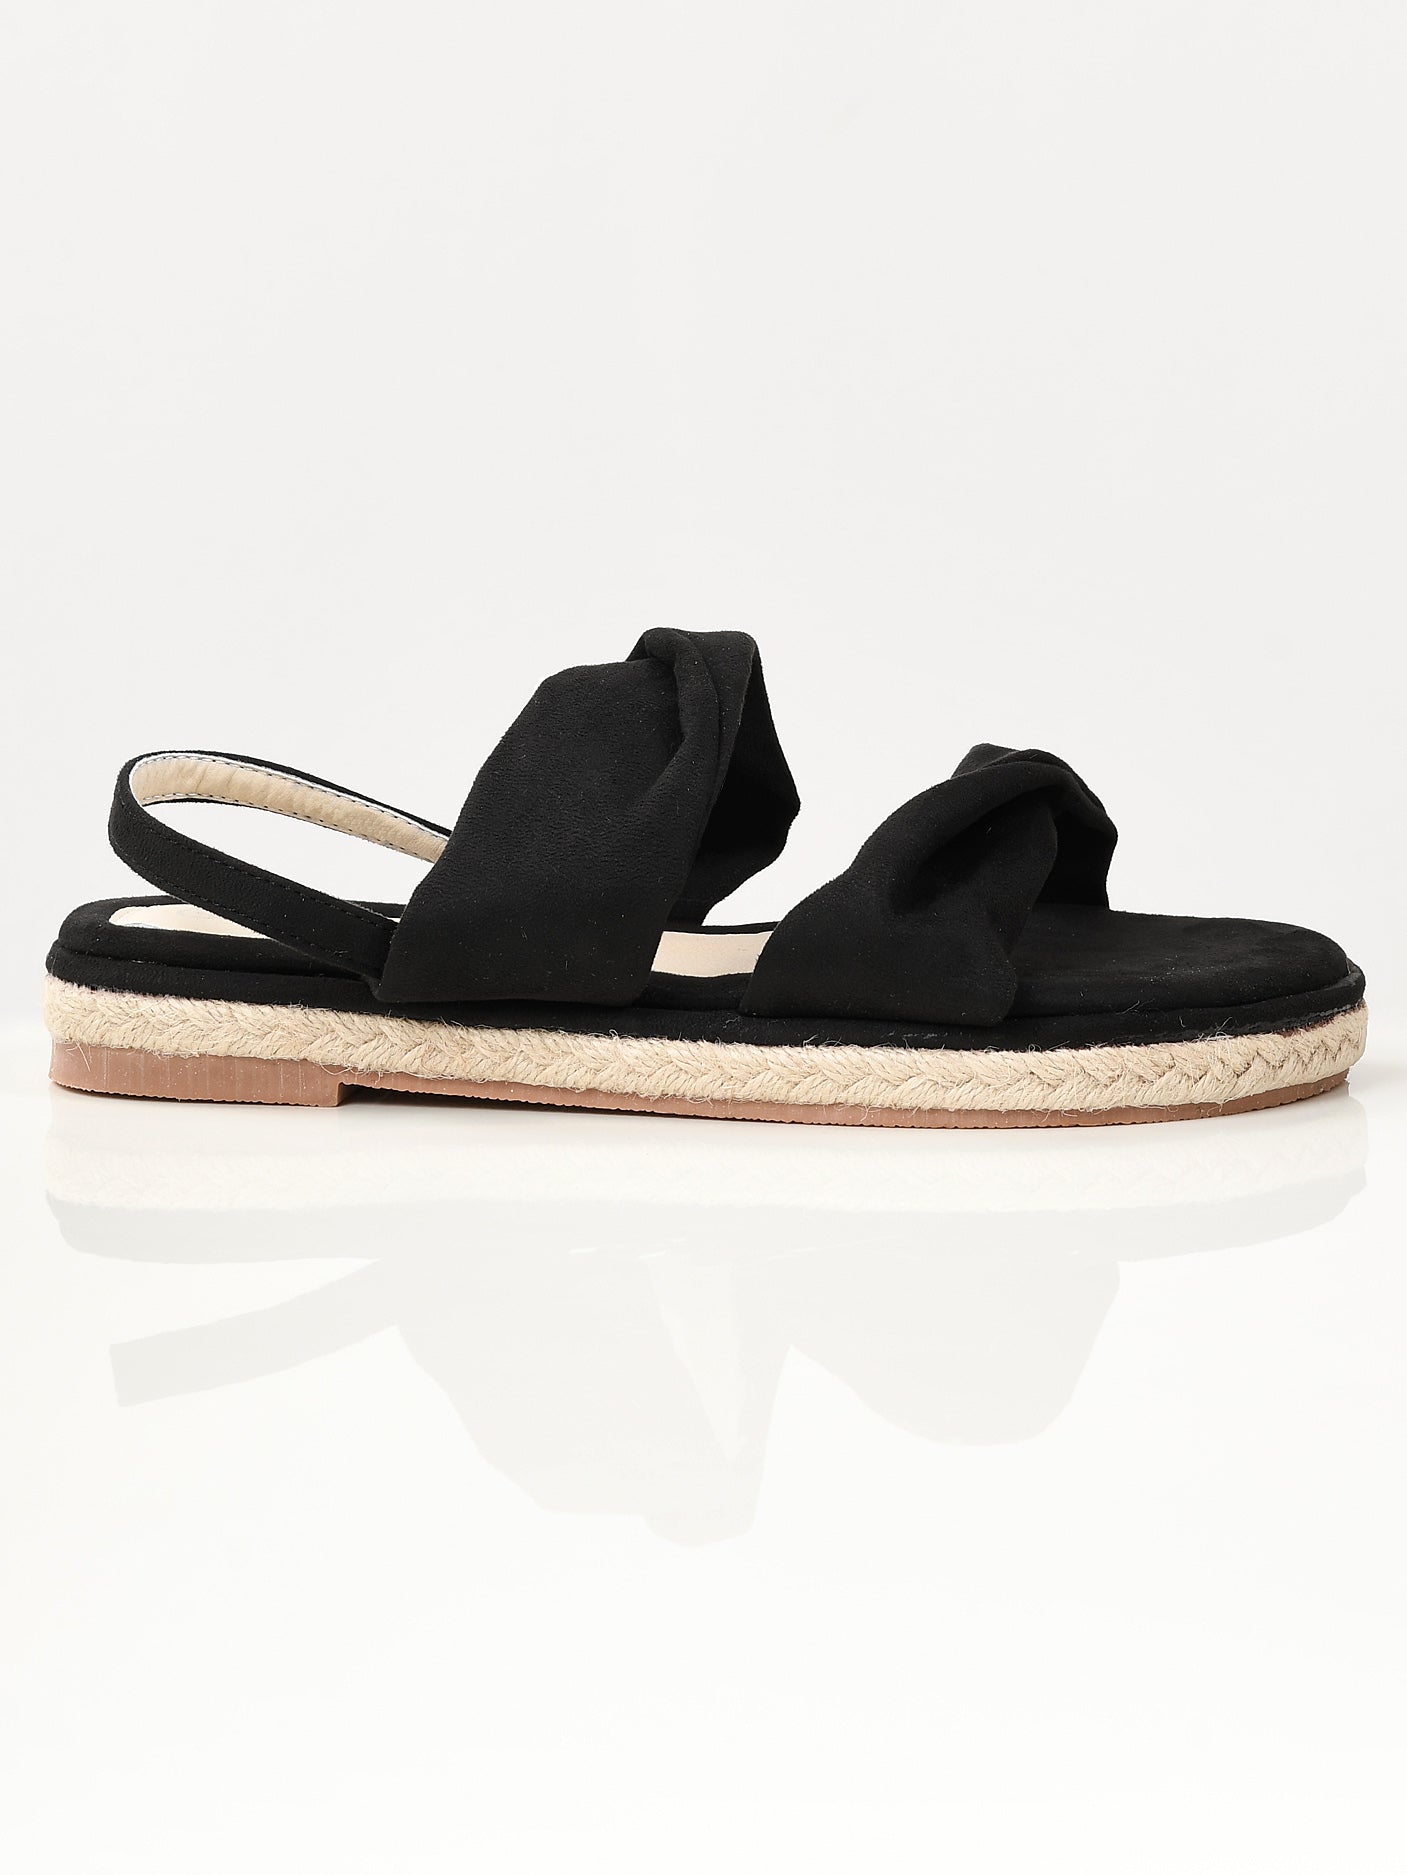 Twisted Suede Sandals - Black